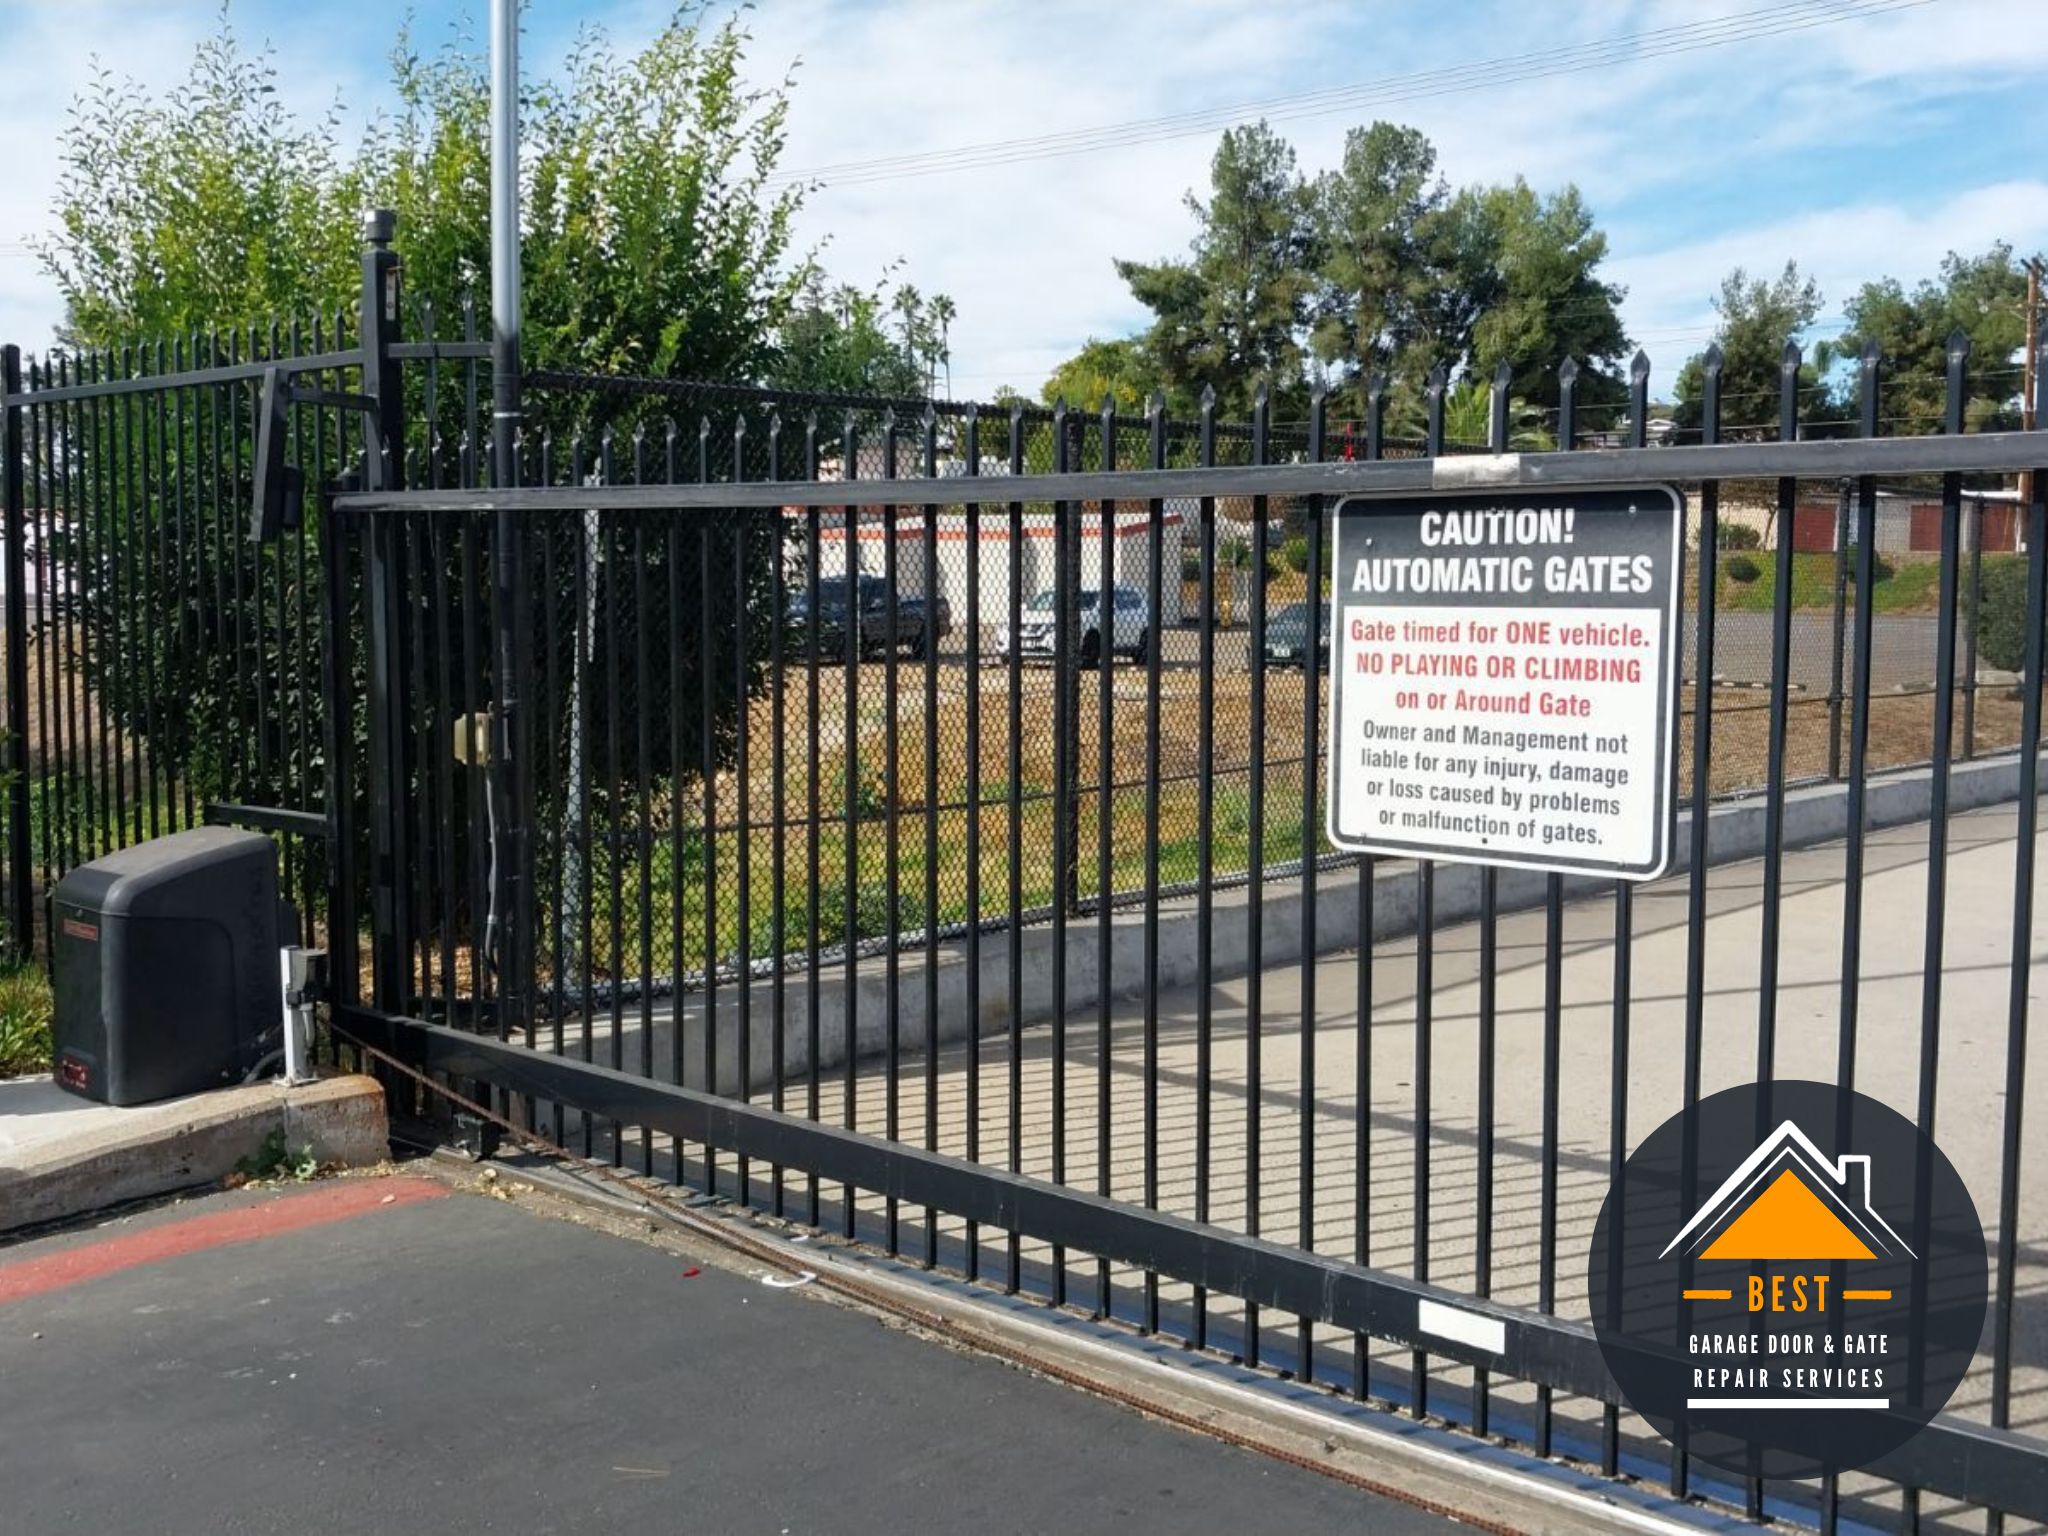 Commercial slide gate fabrication and installation for Apartment complex Rancho Laguna in El Cajon CA, 92021